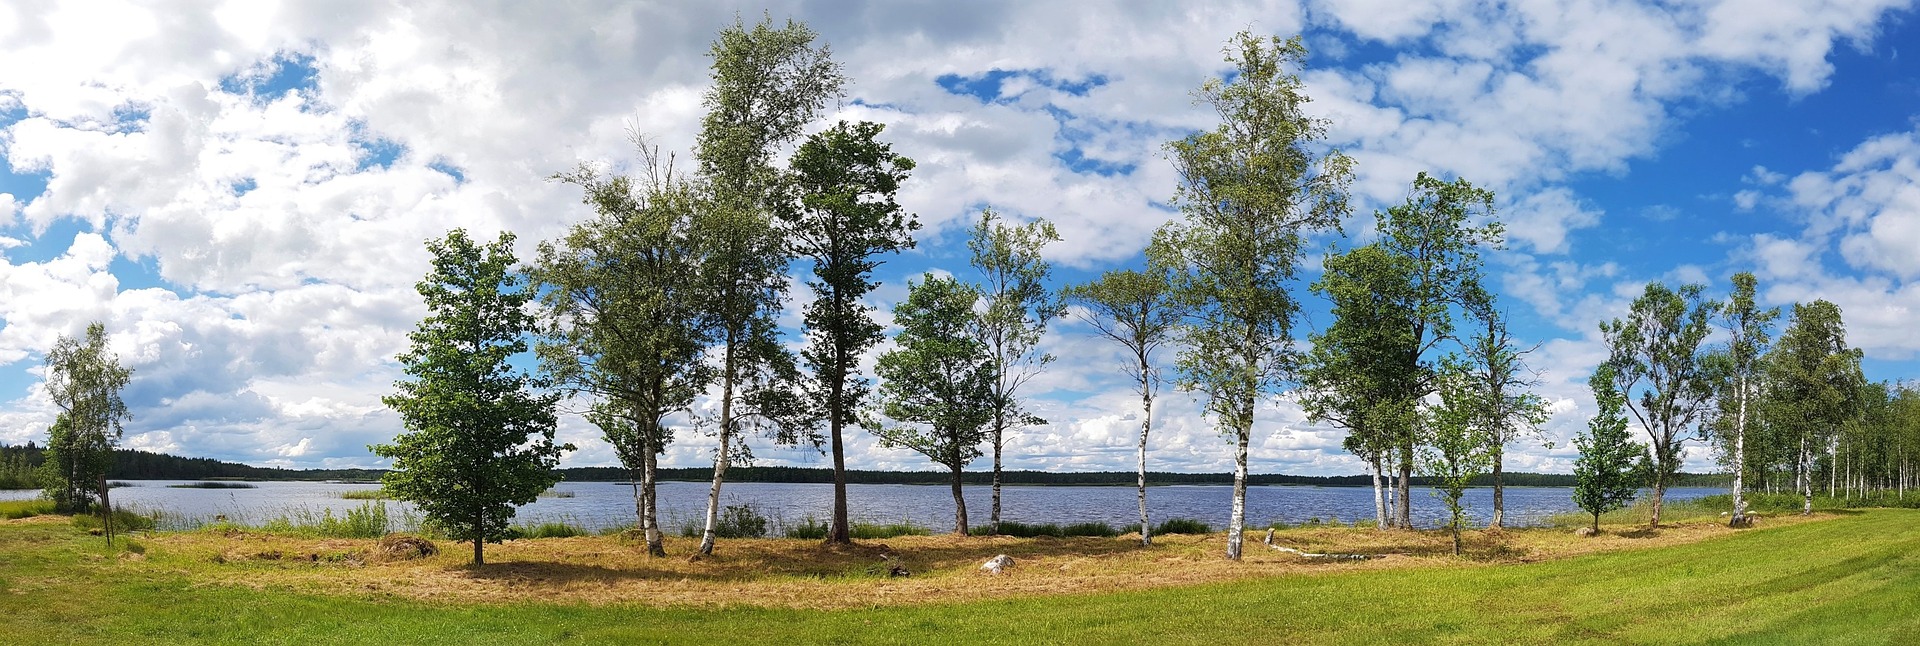 picture of trees by a lake